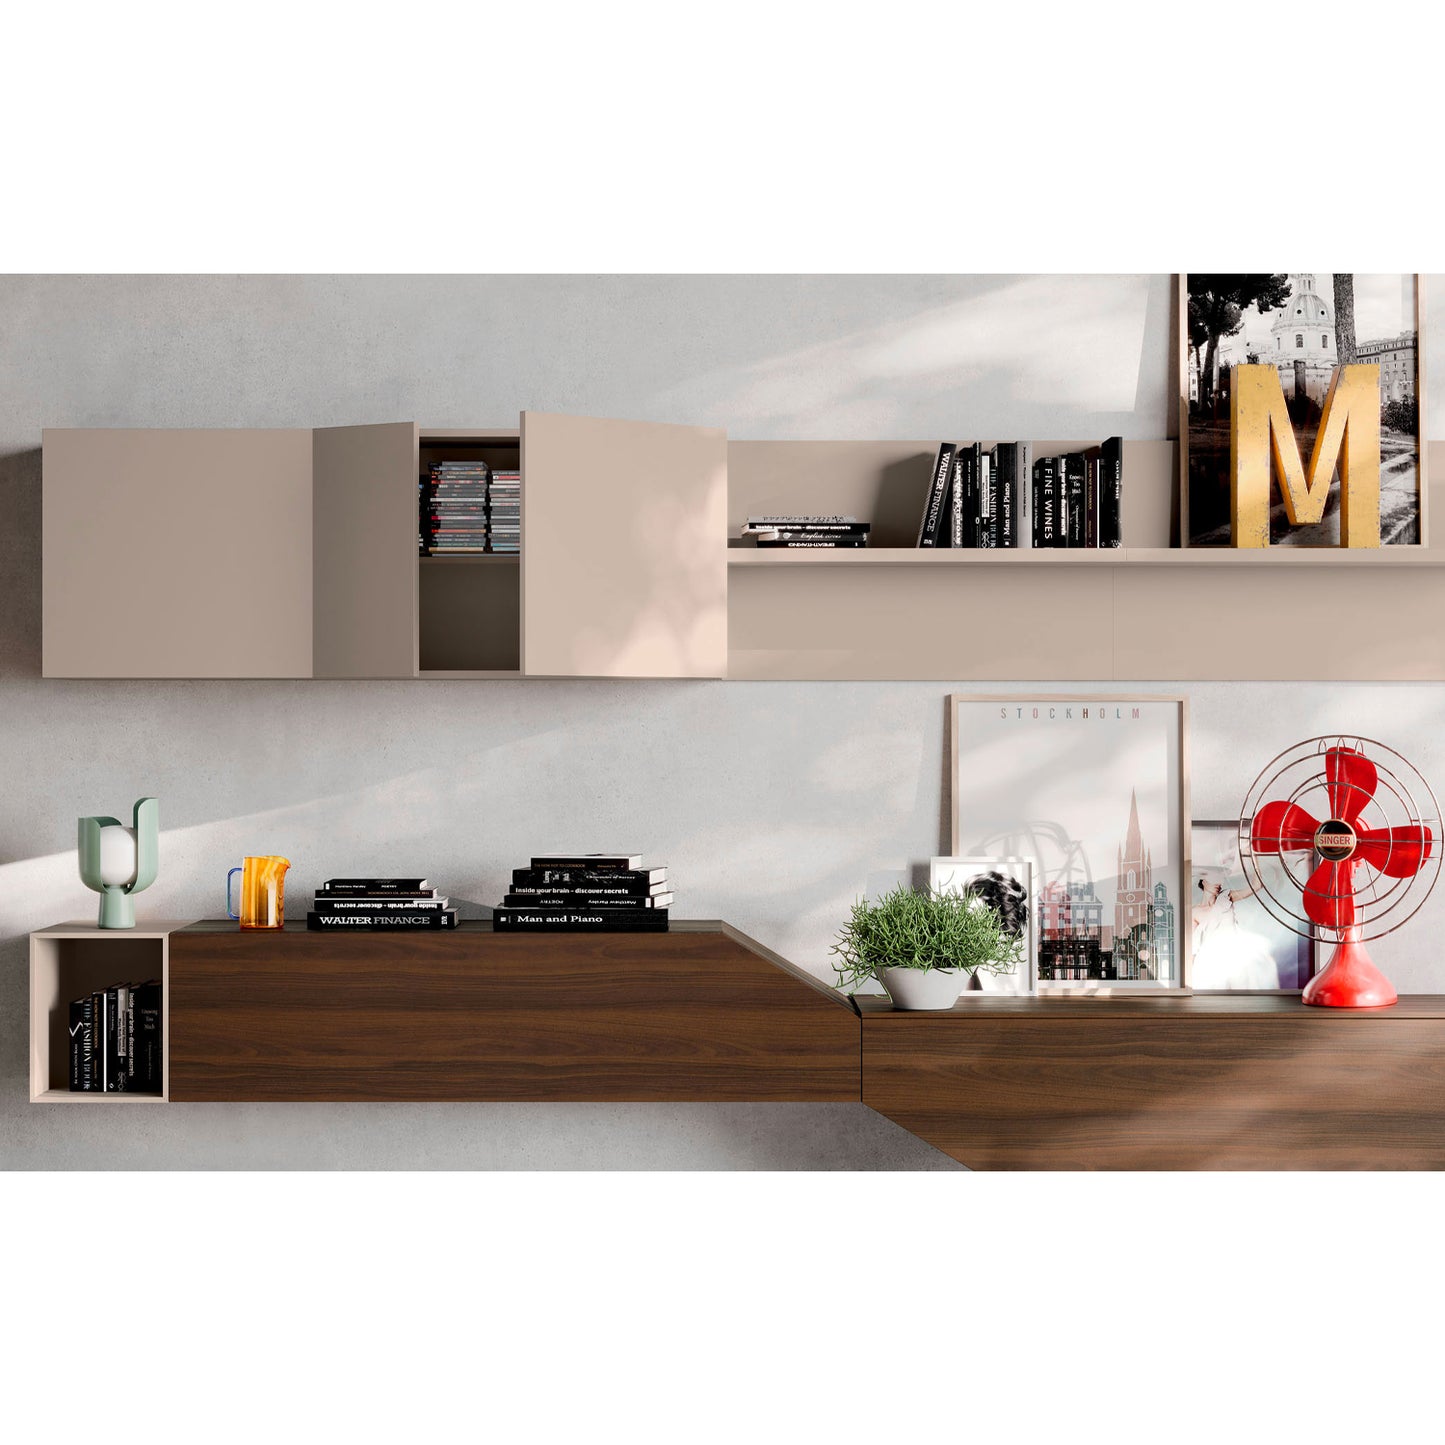 Light Day 12 geometric design wall unit by Orme Design